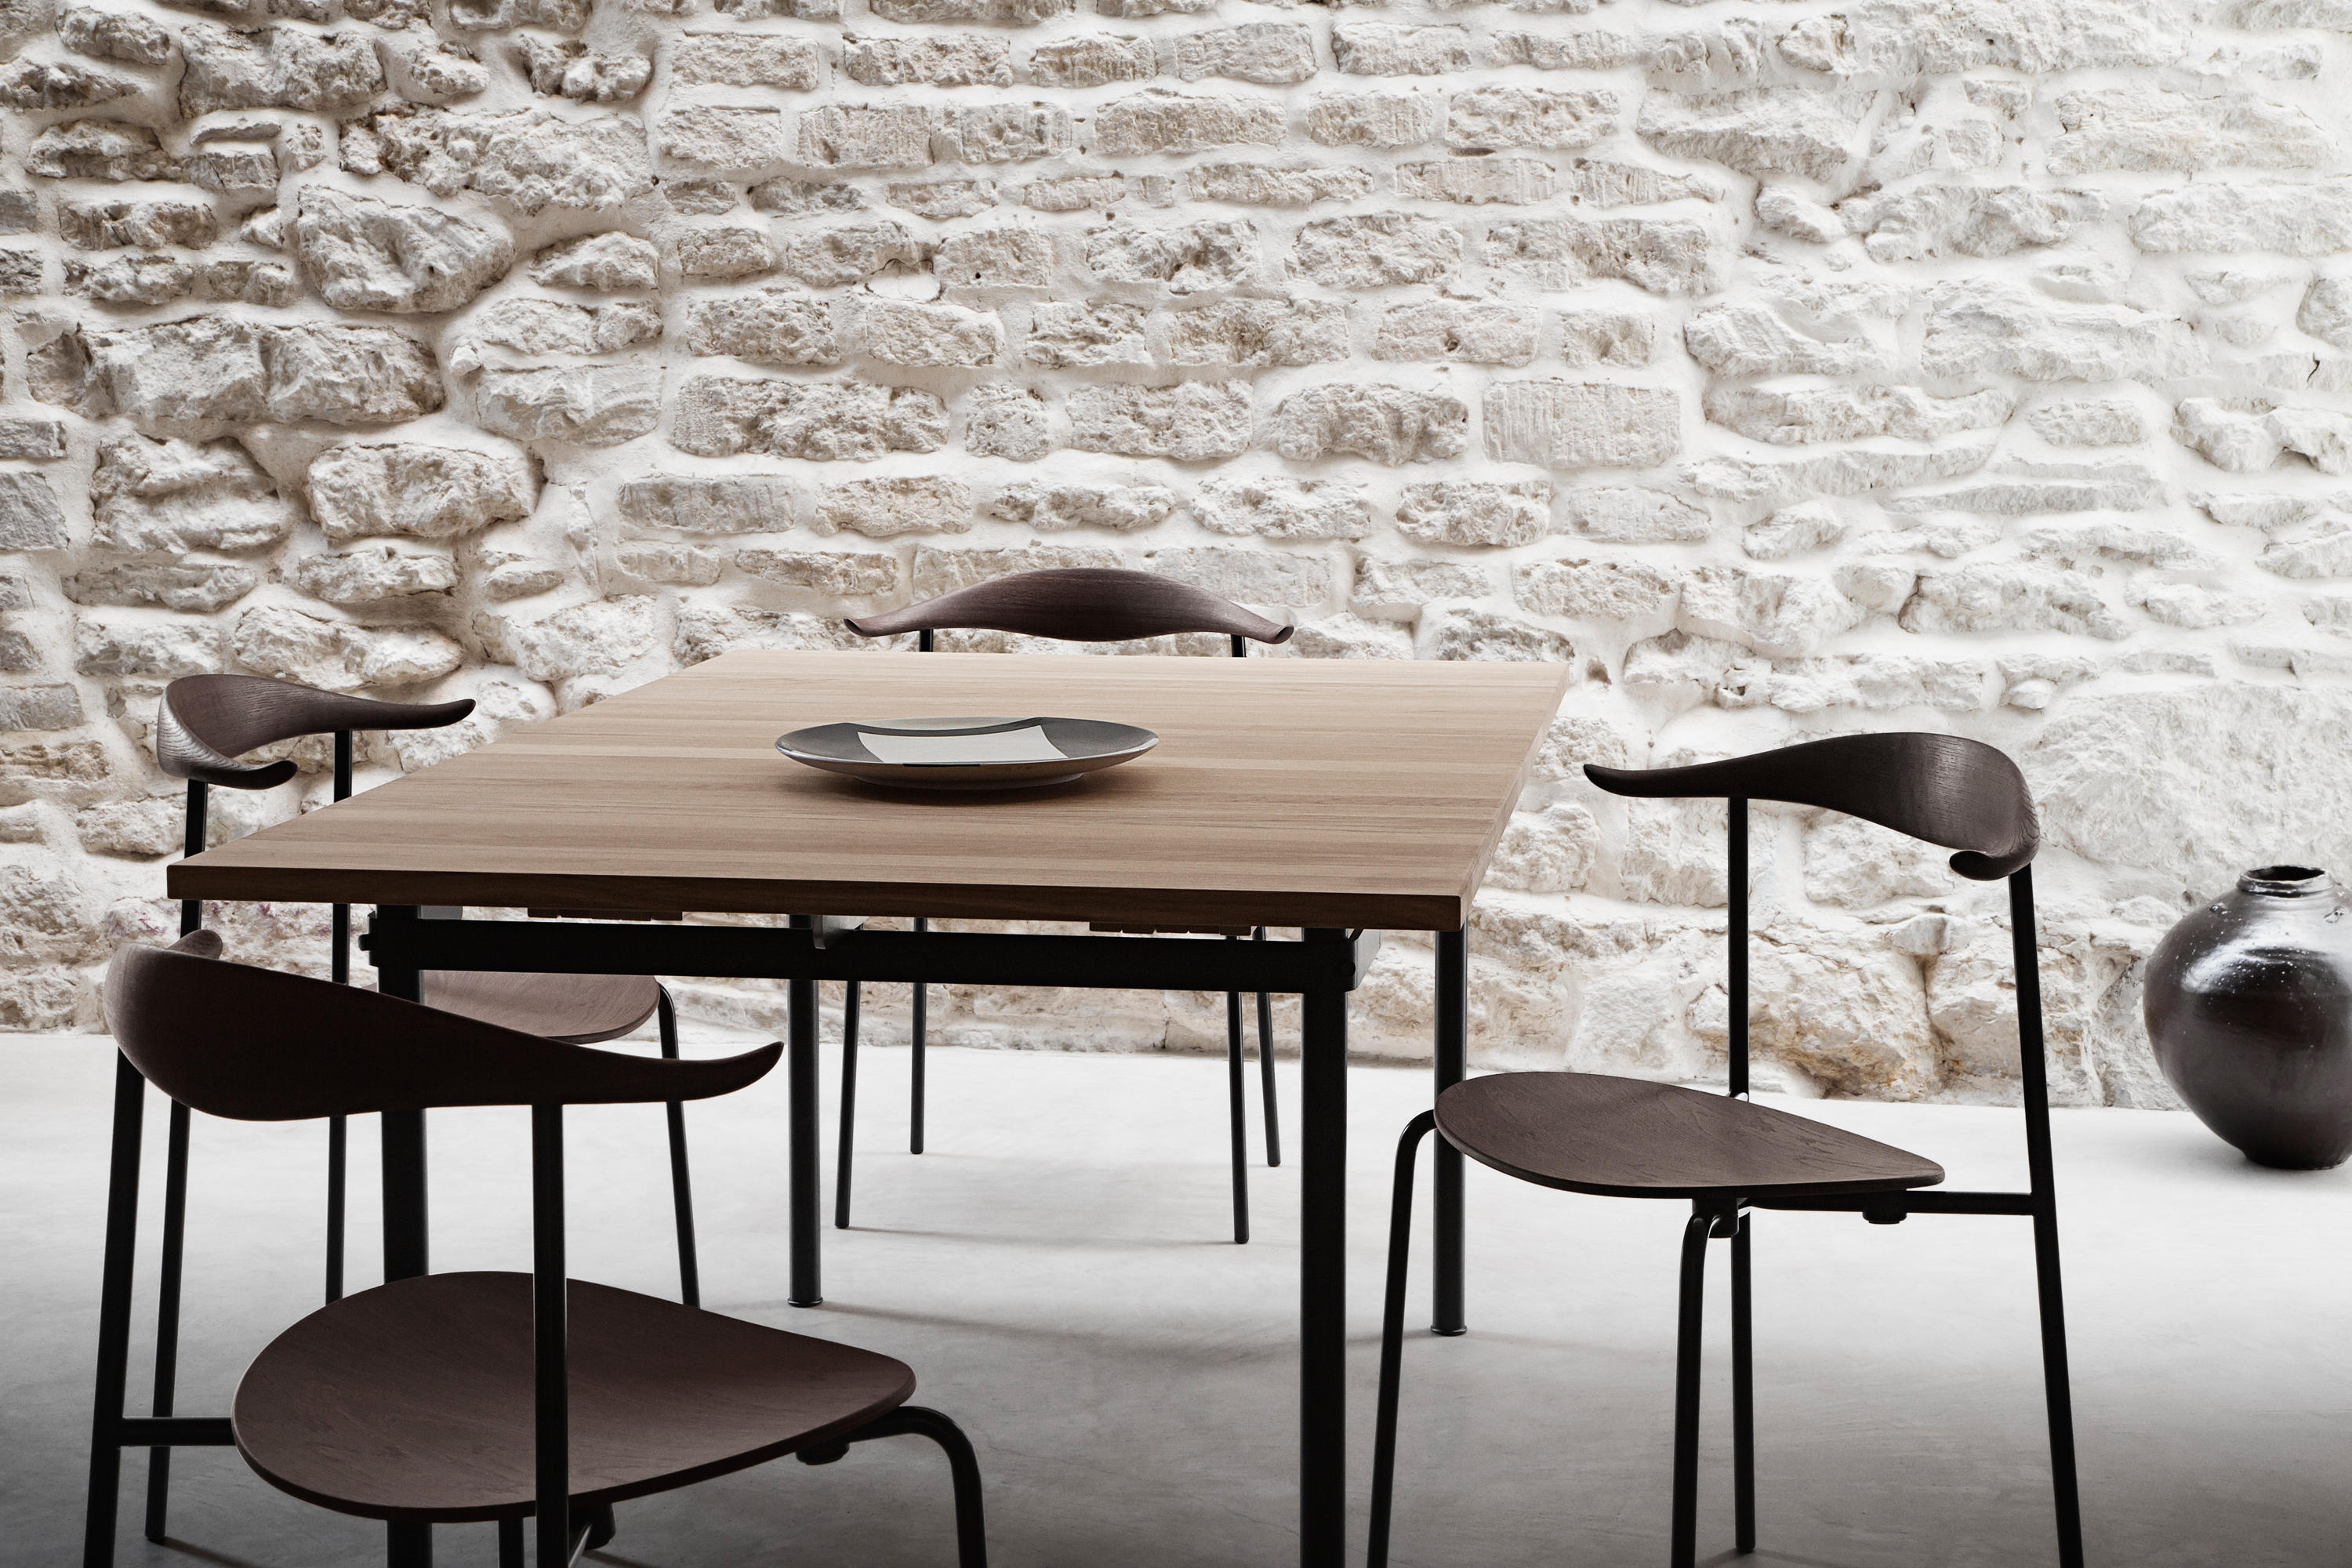 CH88 - Chairs from Carl Hansen & Søn | Architonic